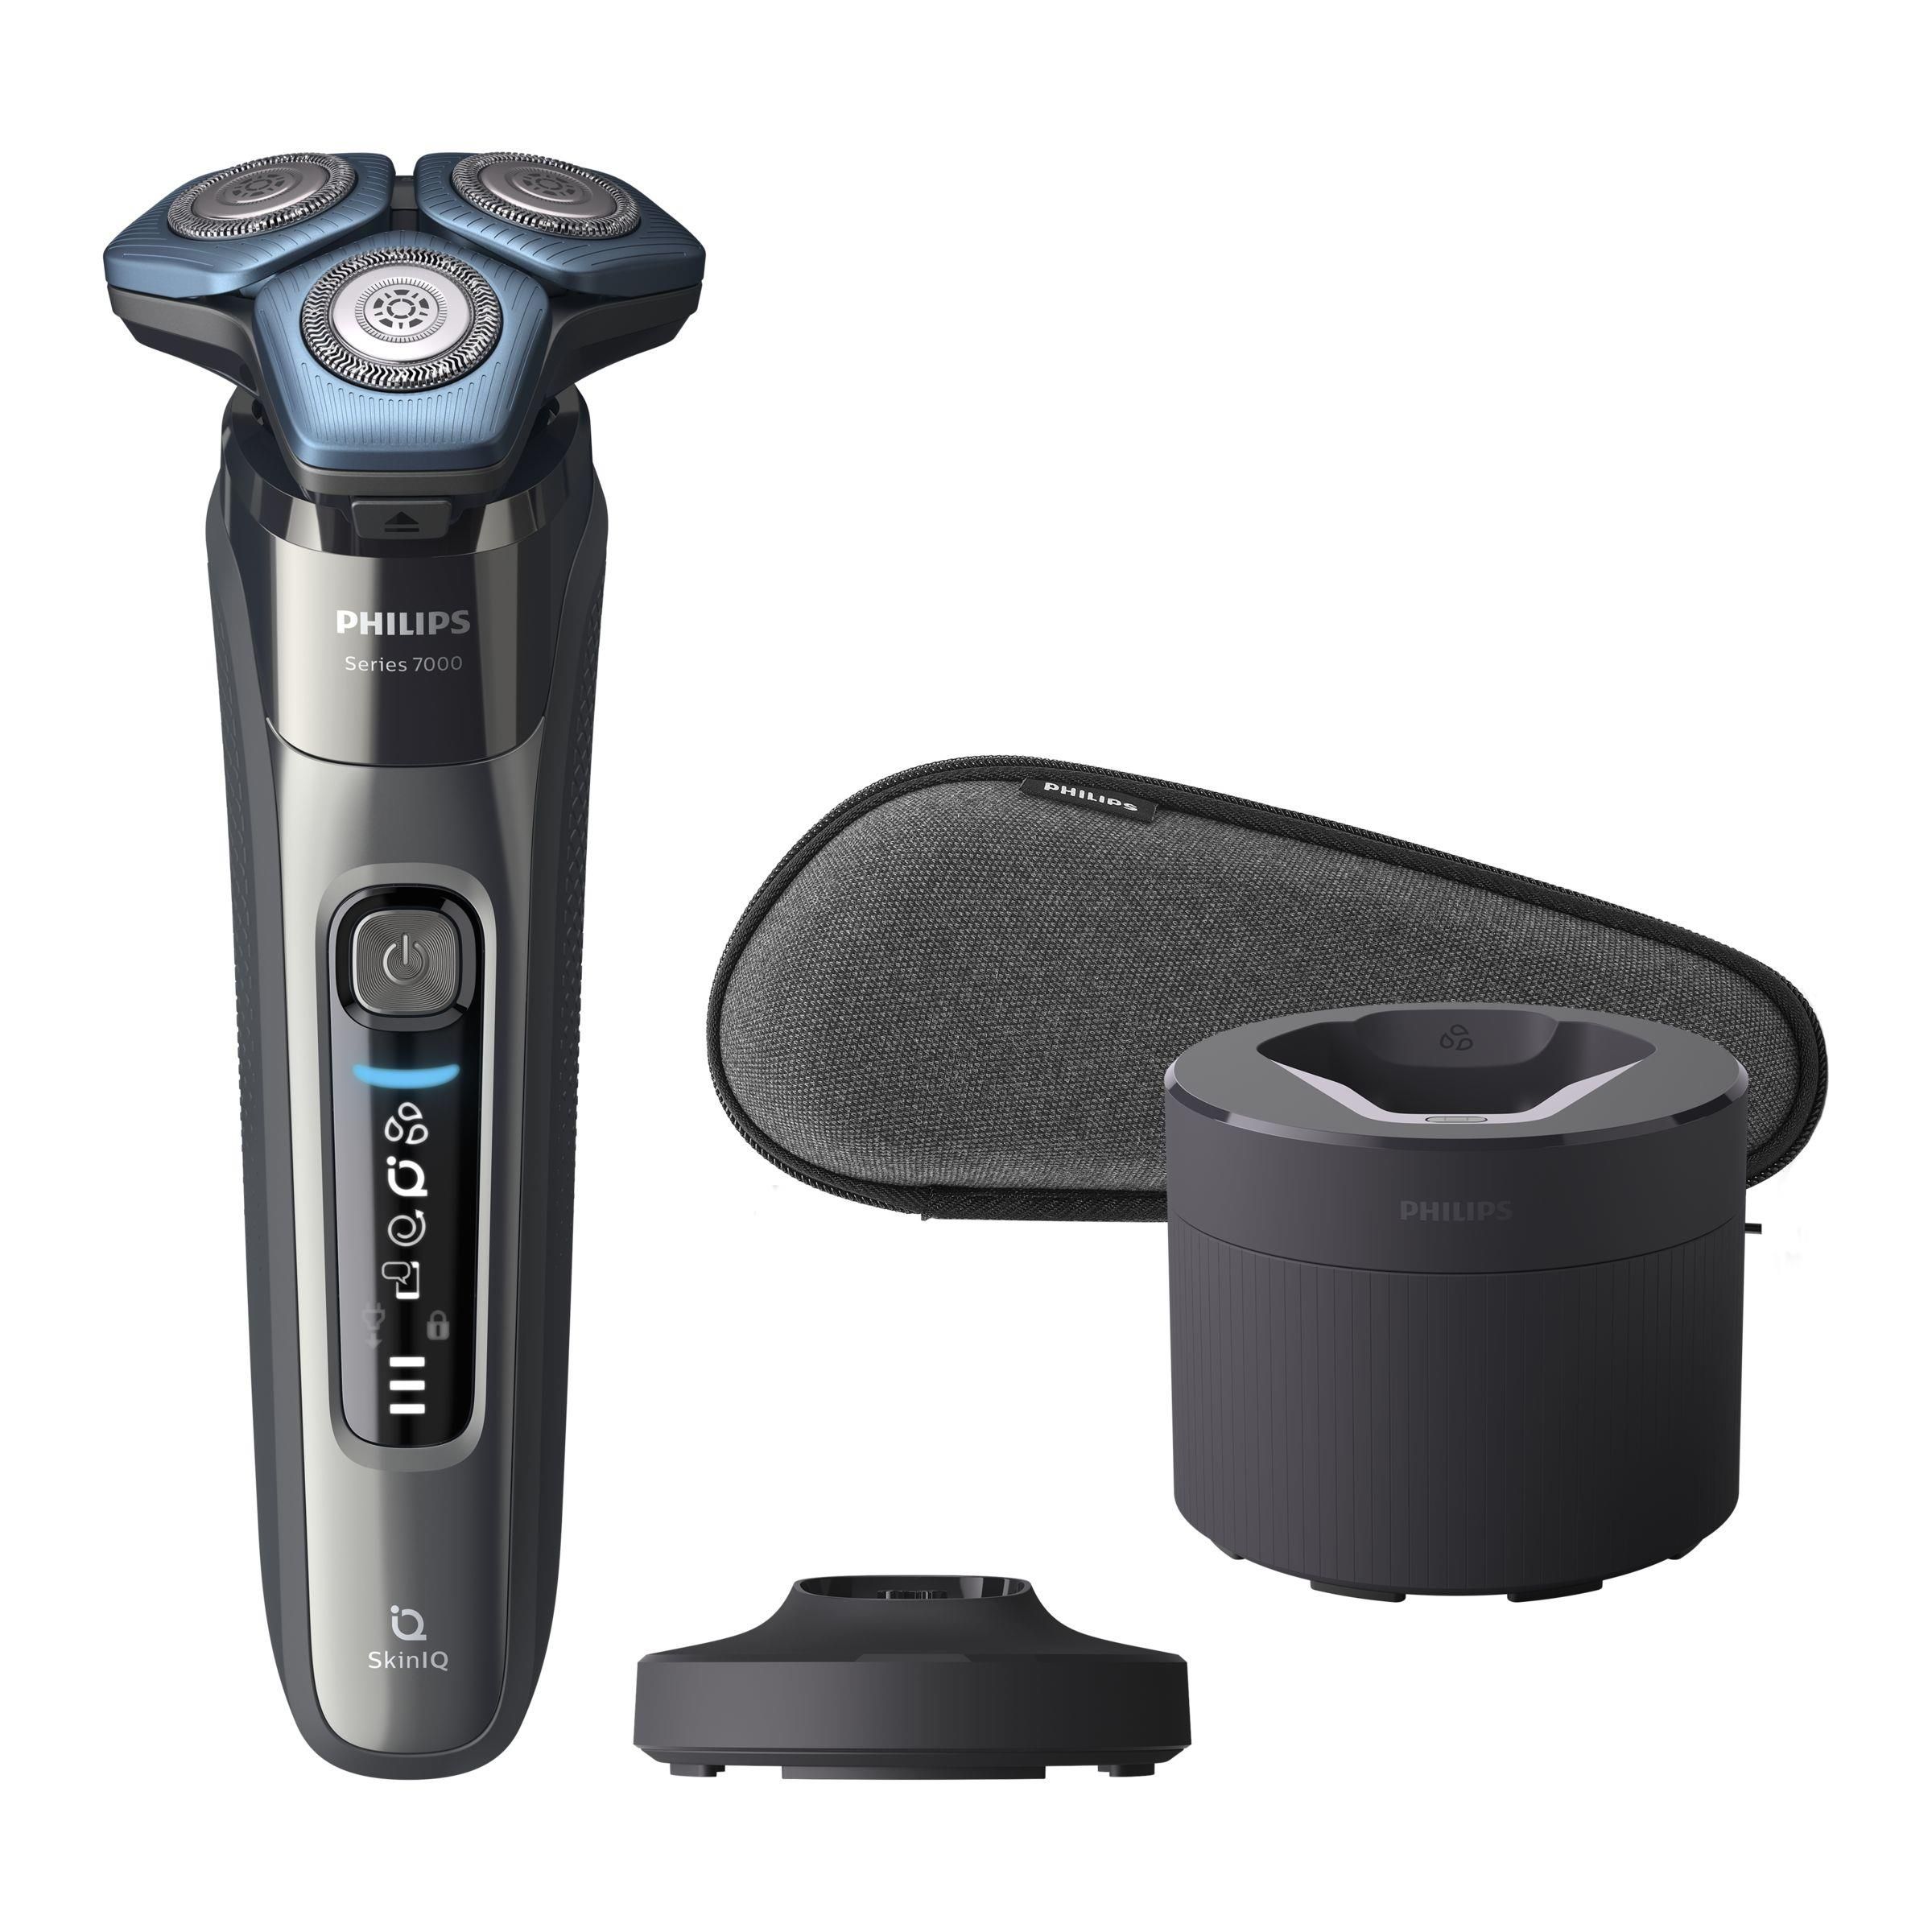 Philips SHAVER Series 7000